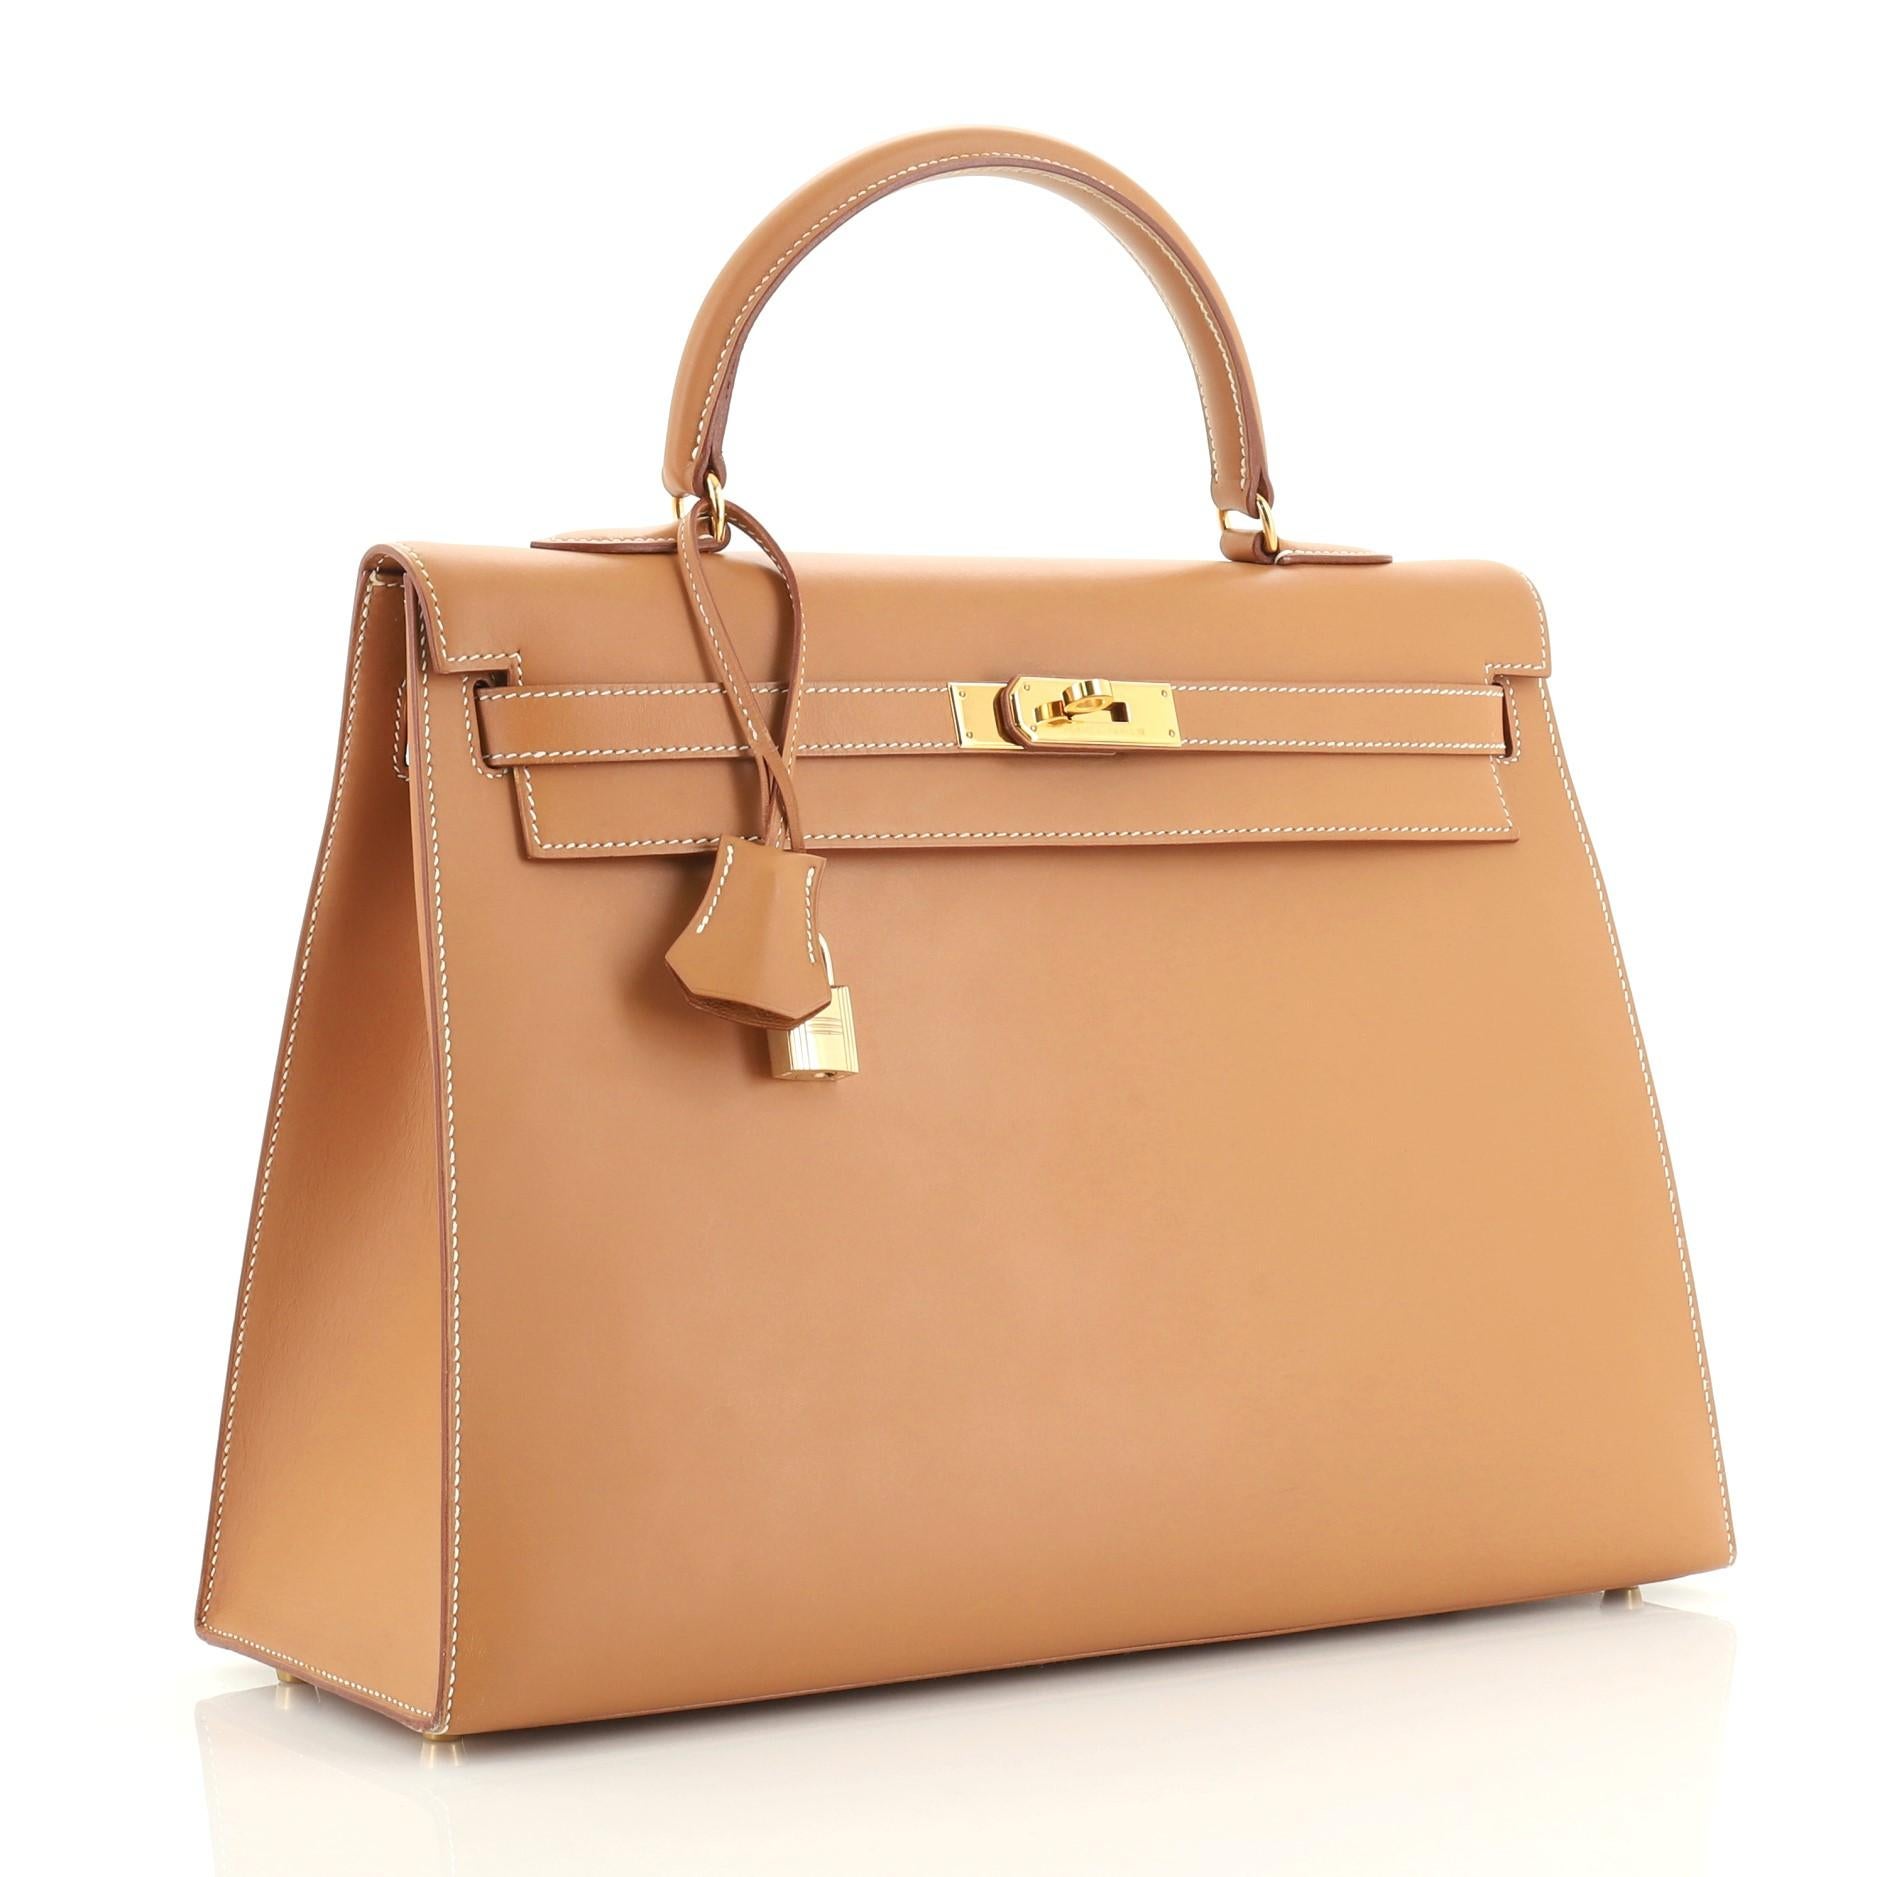 This Hermes Kelly Handbag Natural Chamonix with Gold Hardware 35, crafted from Natural brown Chamonix leather, features a single top handle, frontal flap, protective base studs, and gold hardware. Its turn-lock closure opens to a Natural brown